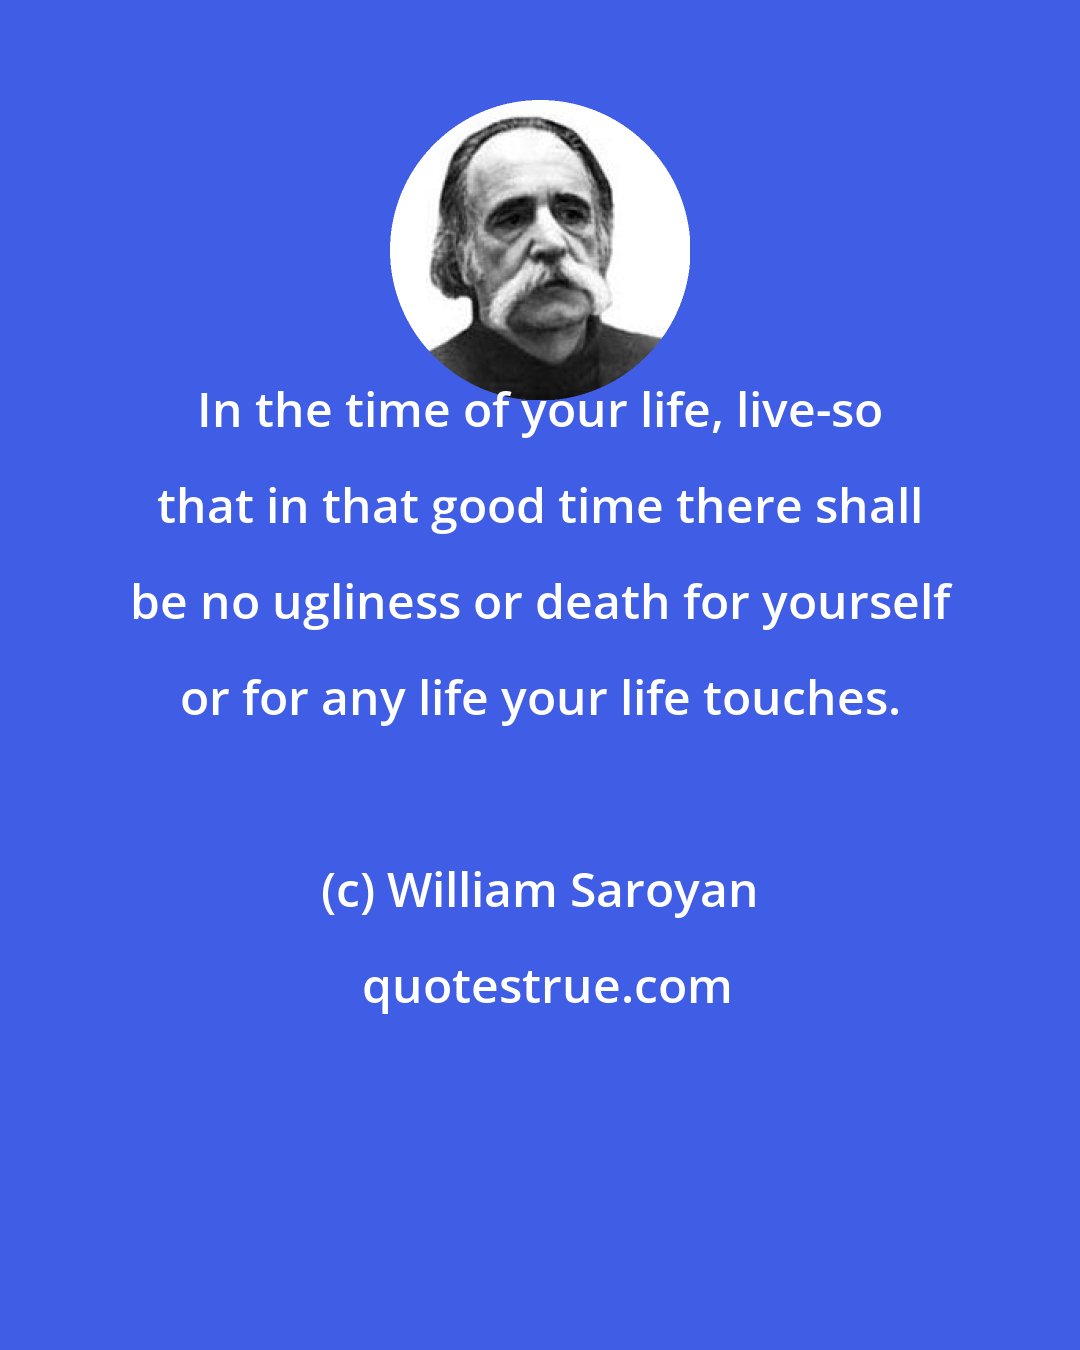 William Saroyan: In the time of your life, live-so that in that good time there shall be no ugliness or death for yourself or for any life your life touches.